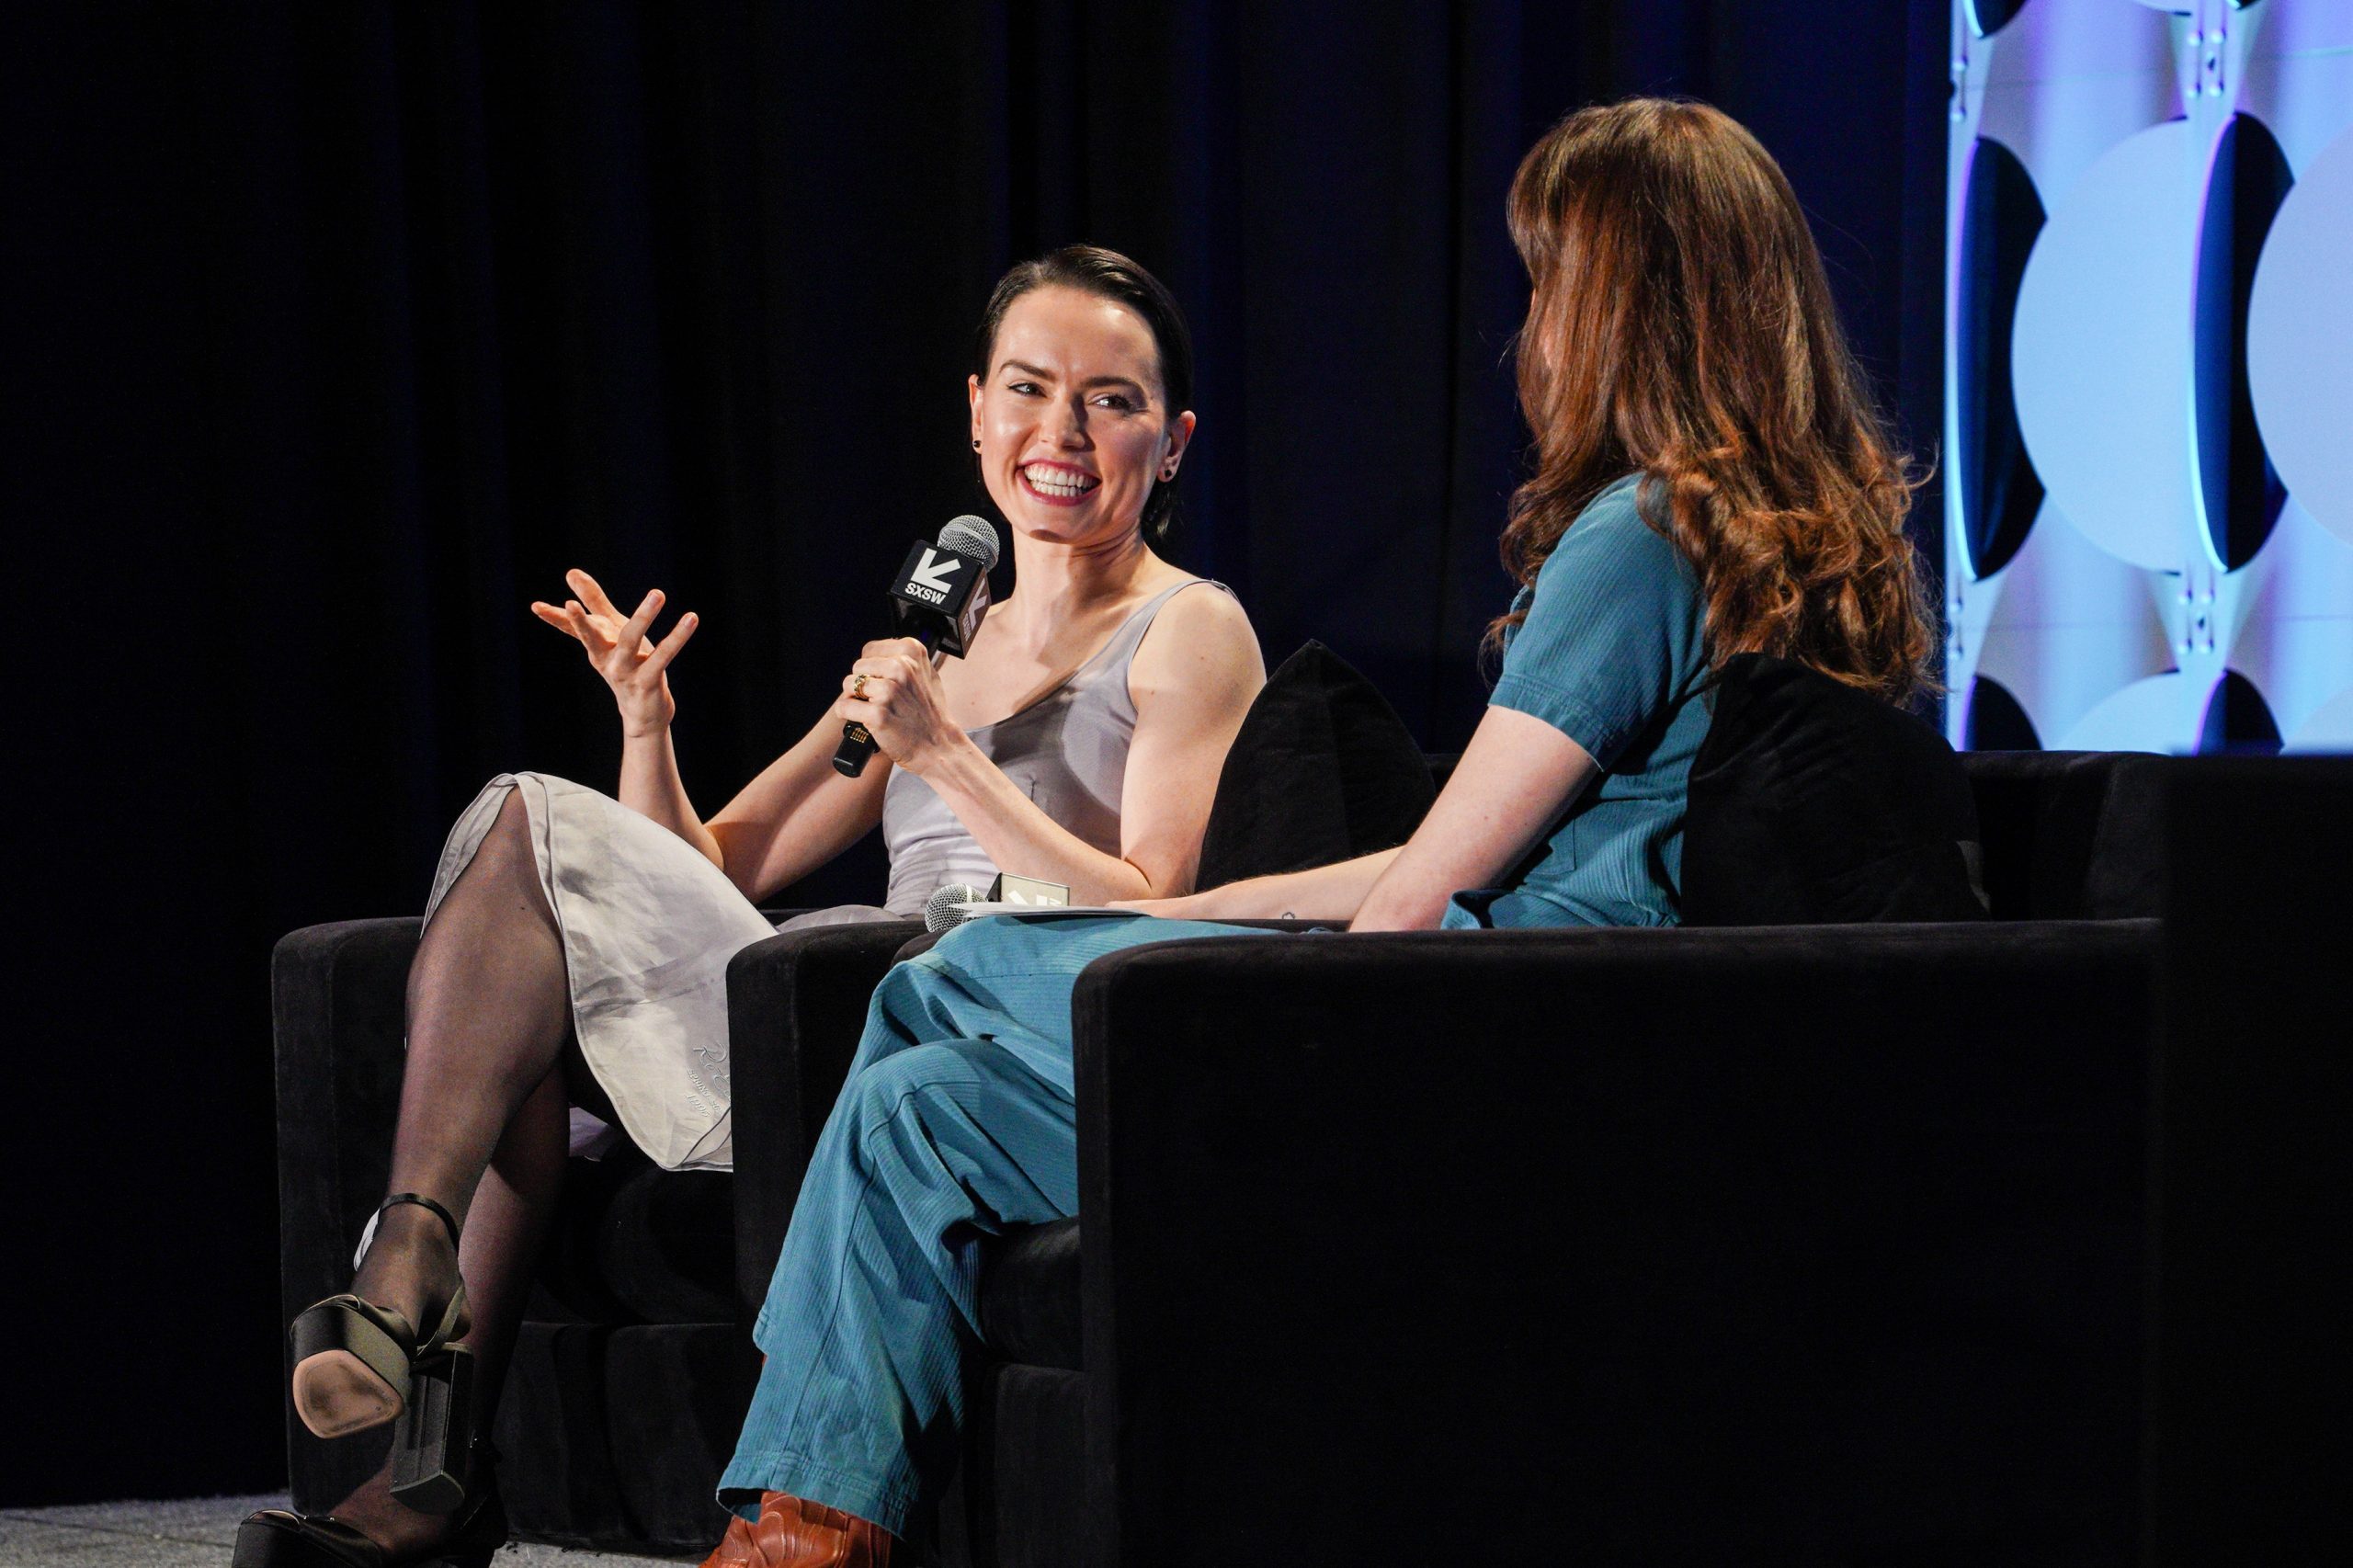 A Conversation with Daisy Ridley – Photo by Melissa Bordeau